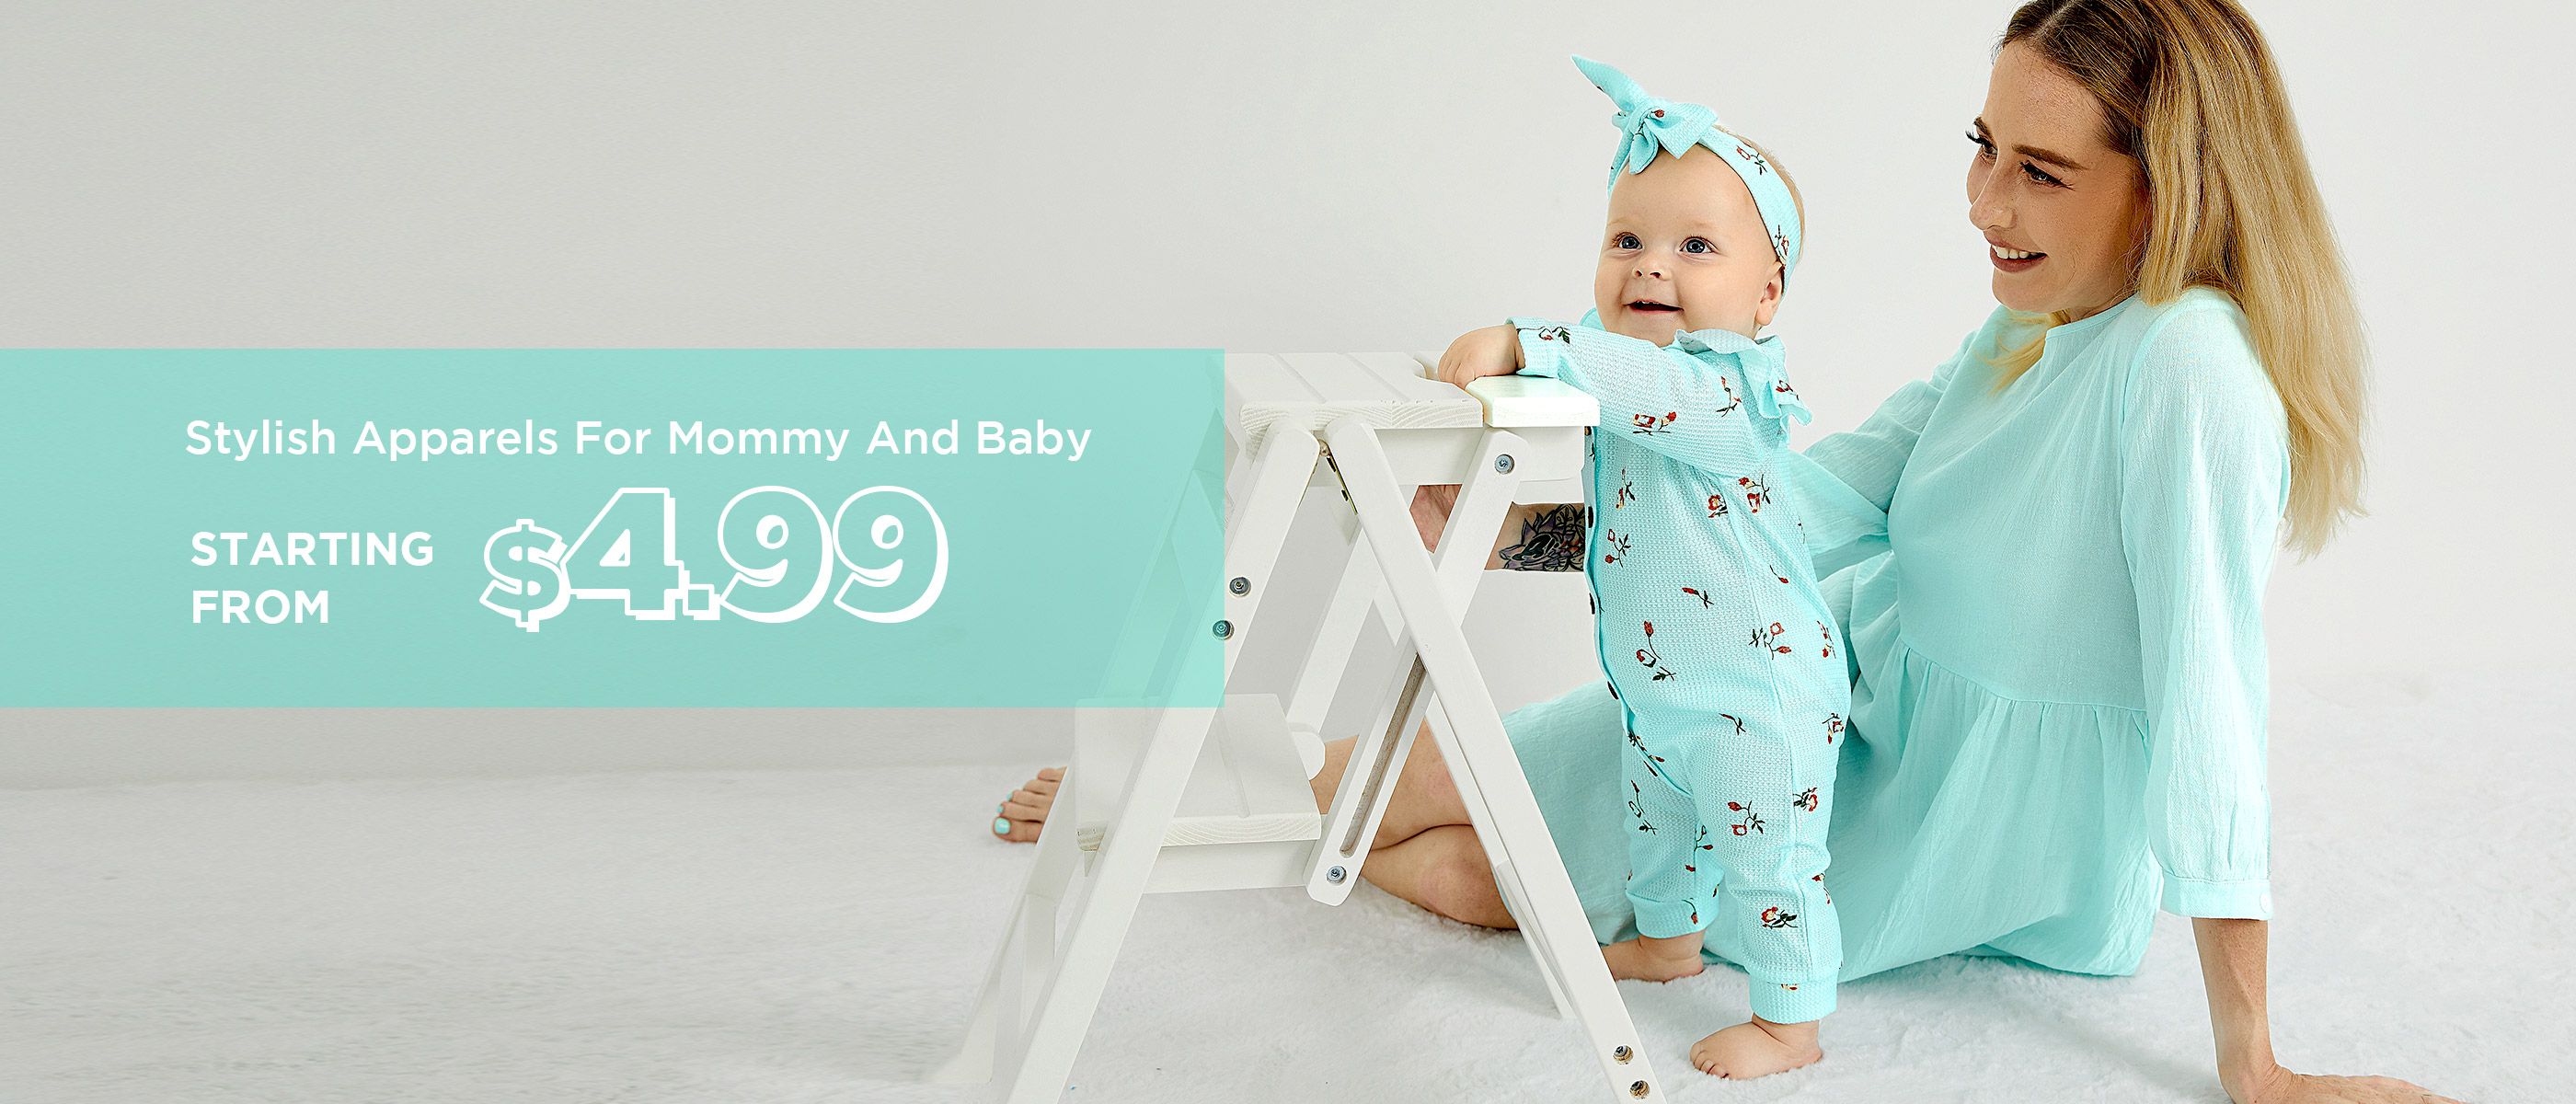 Stylish Apparels For Mommy And Baby